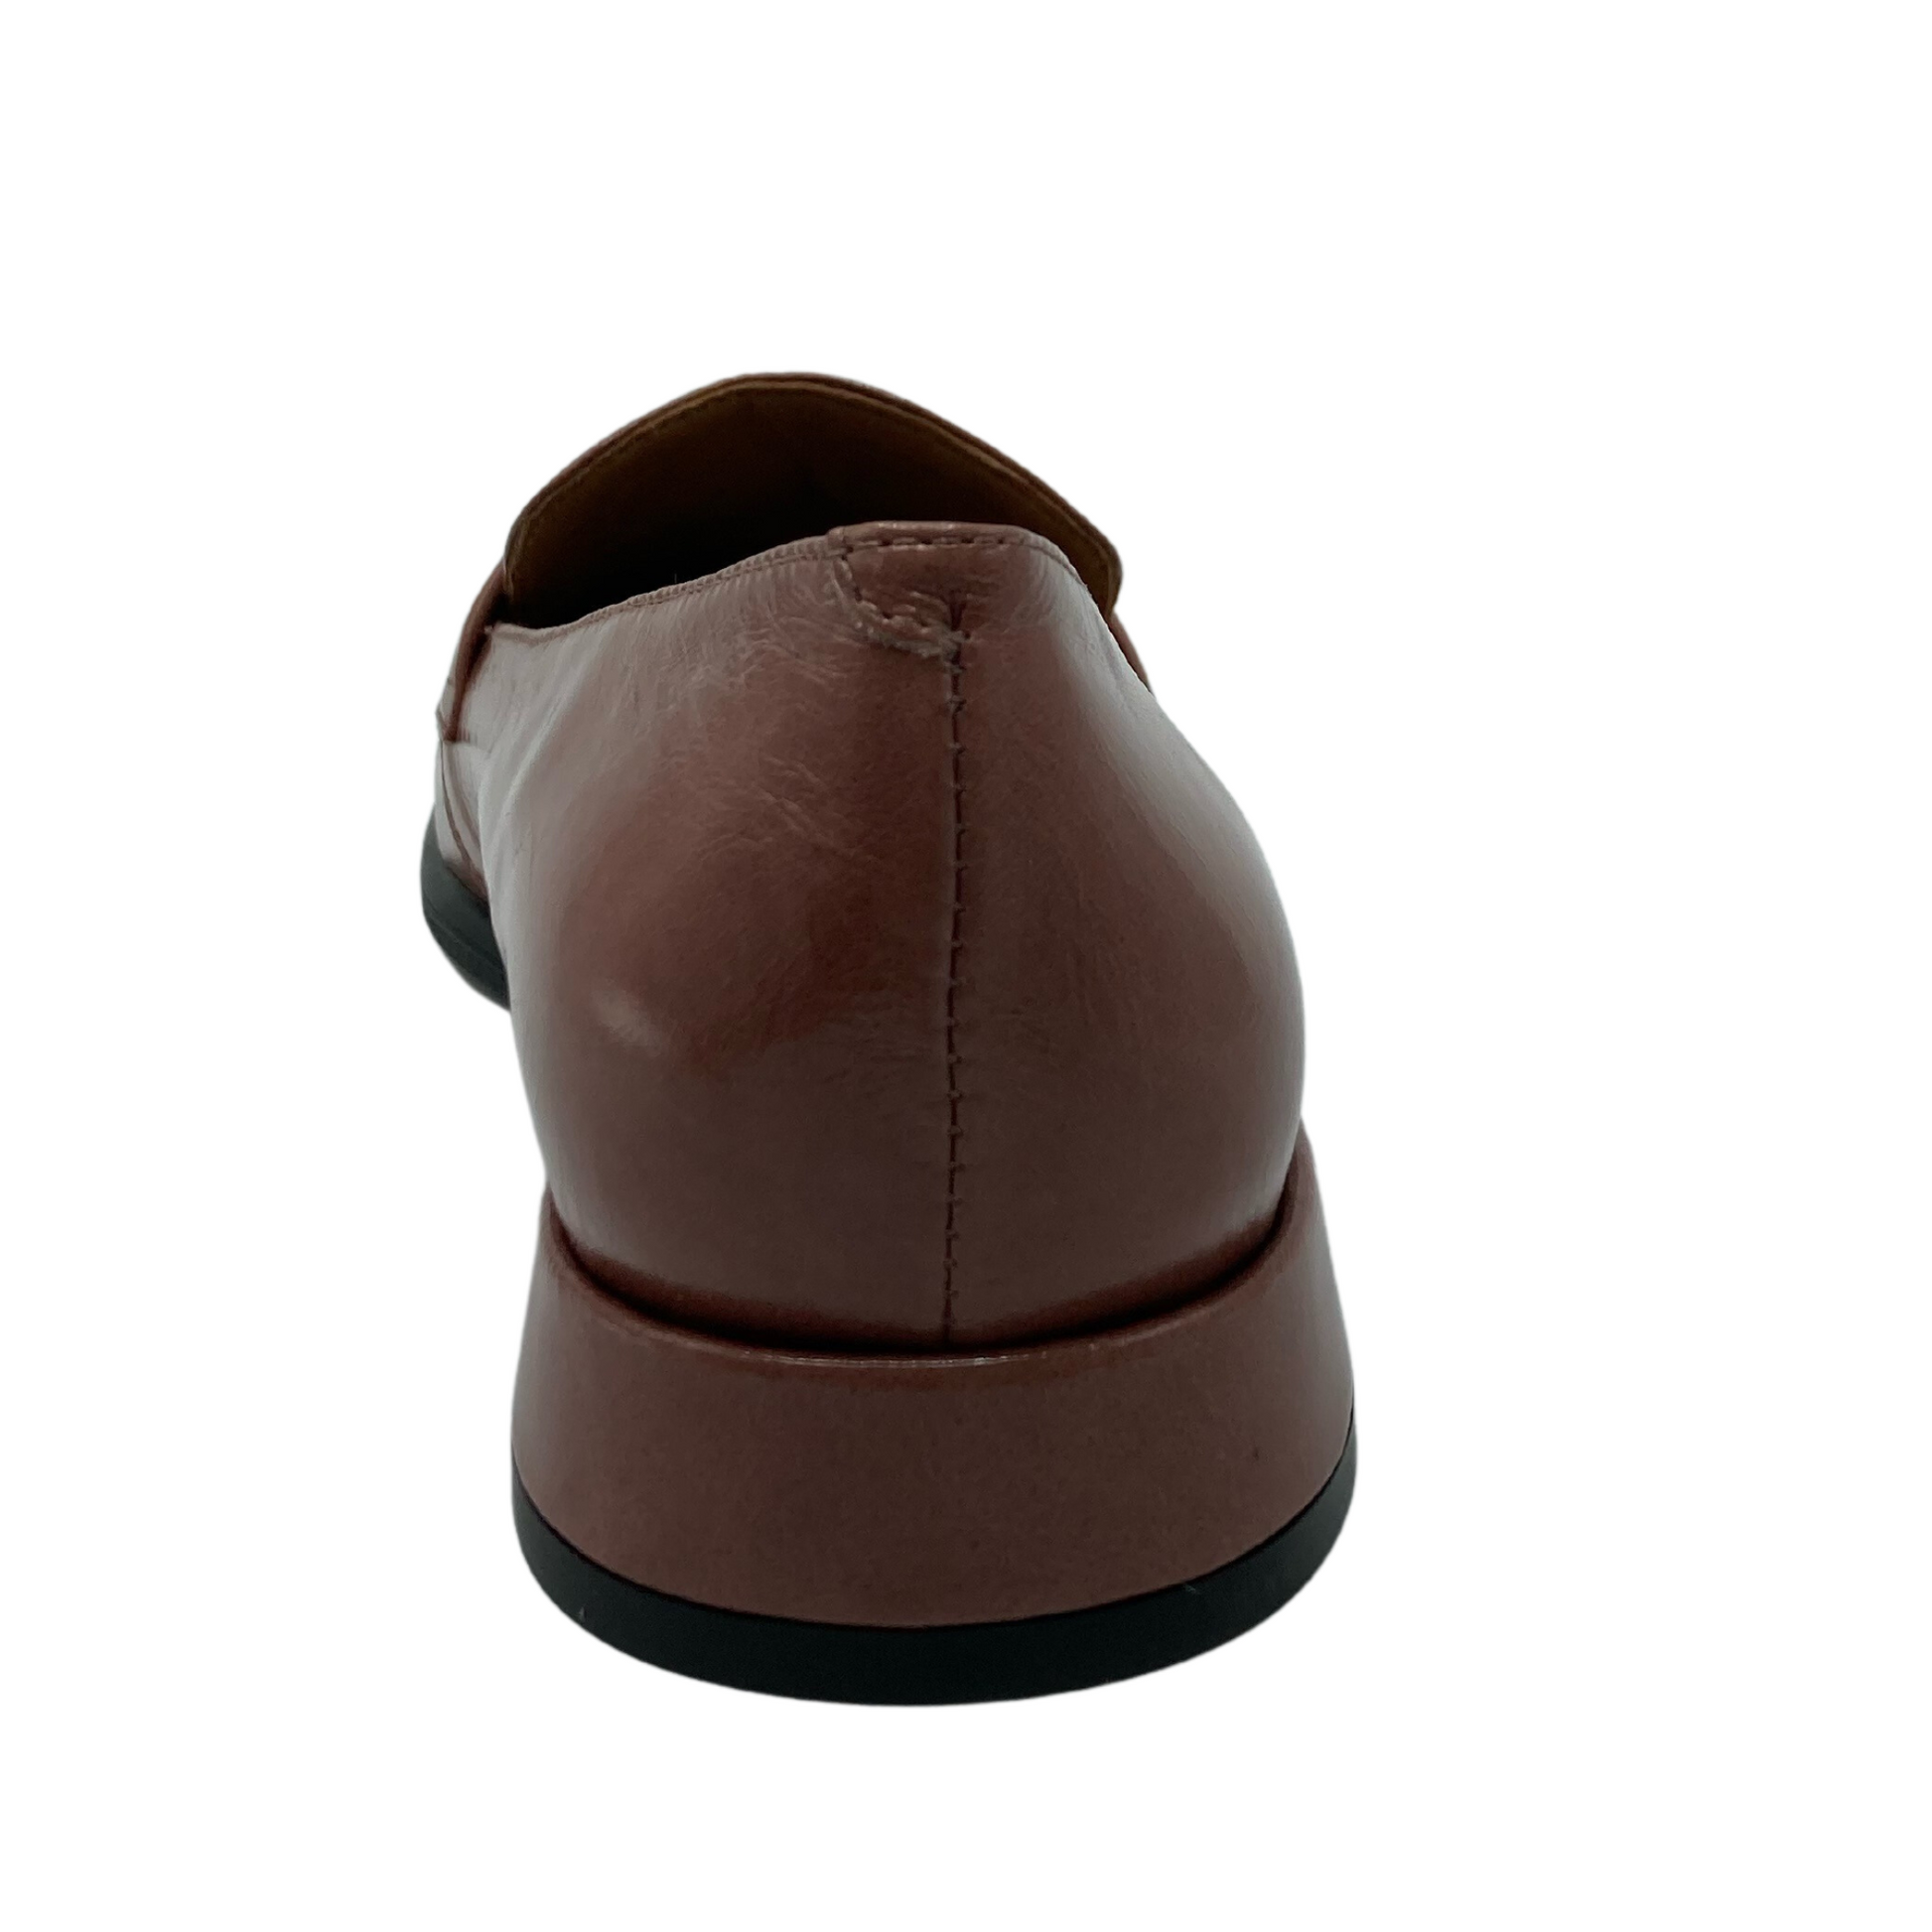 Back view of brown leather loafer with low heel